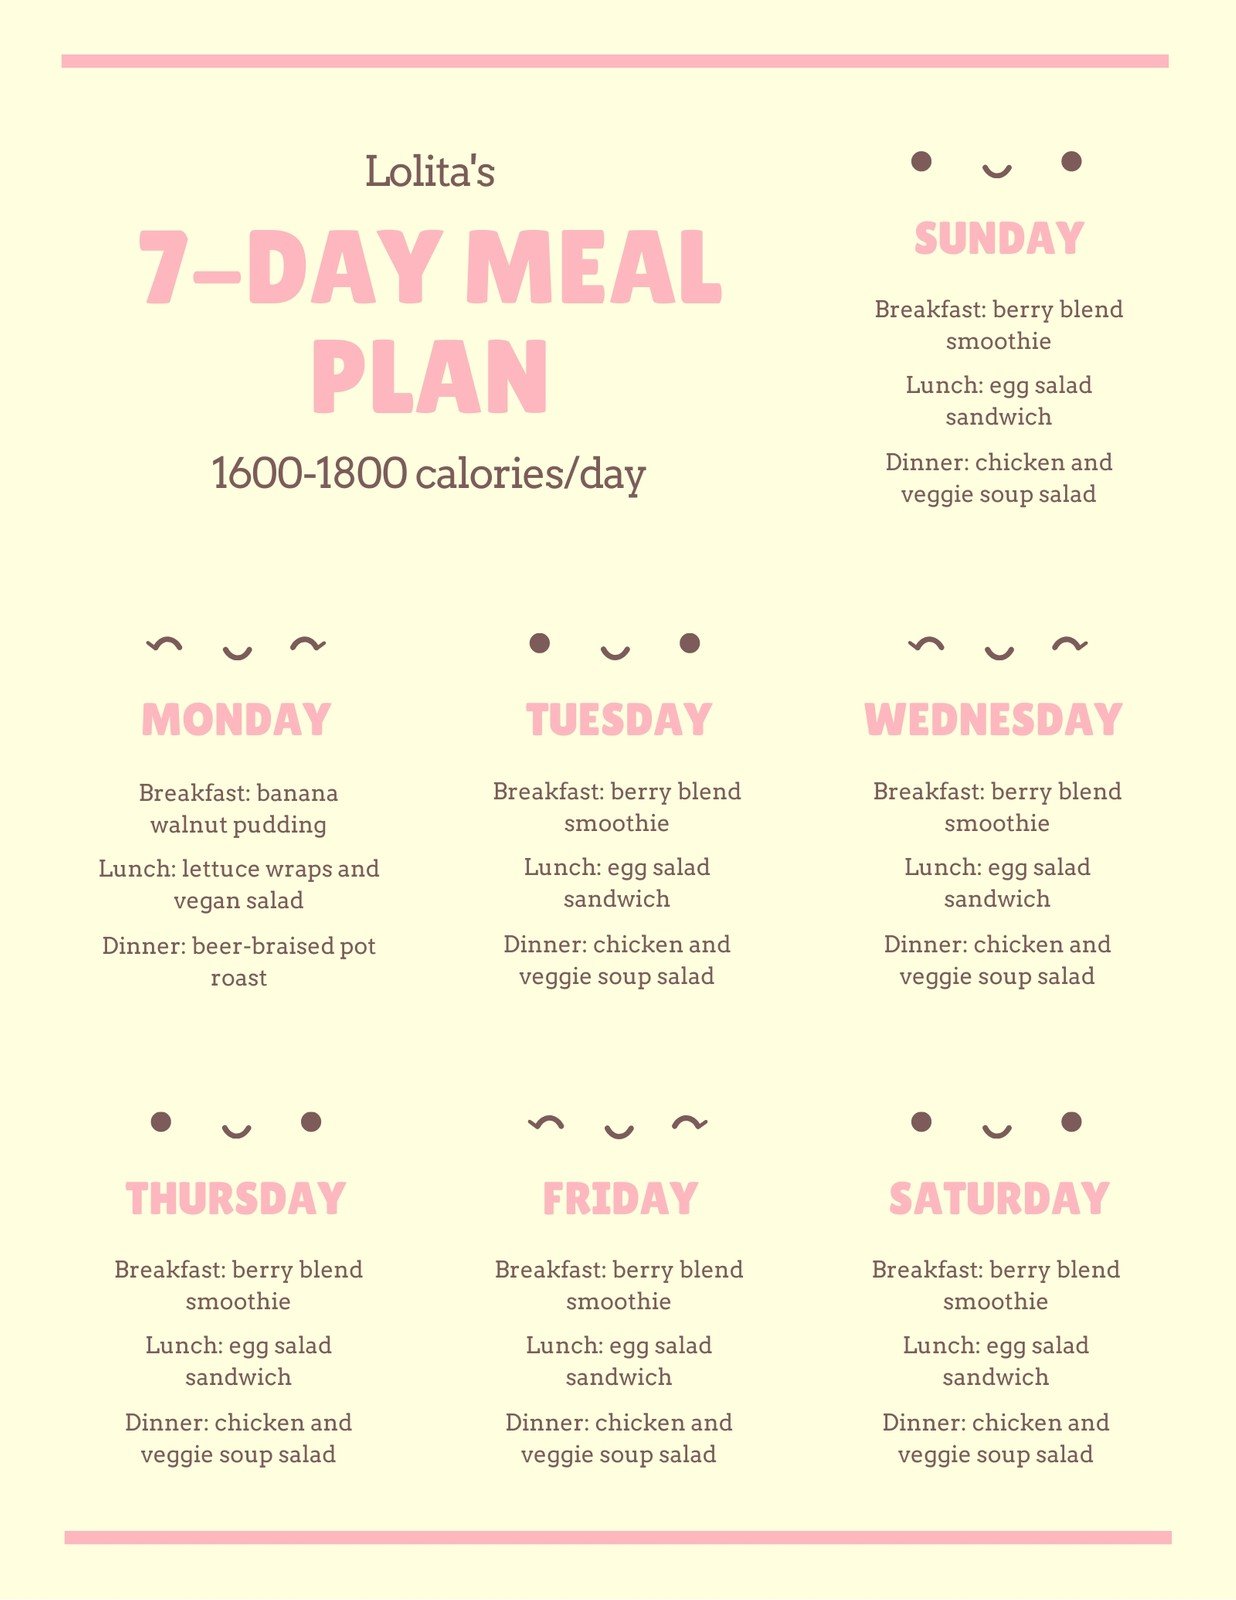 Free, customizable meal planner menu templates  Canva With 7 Day Menu Planner Template